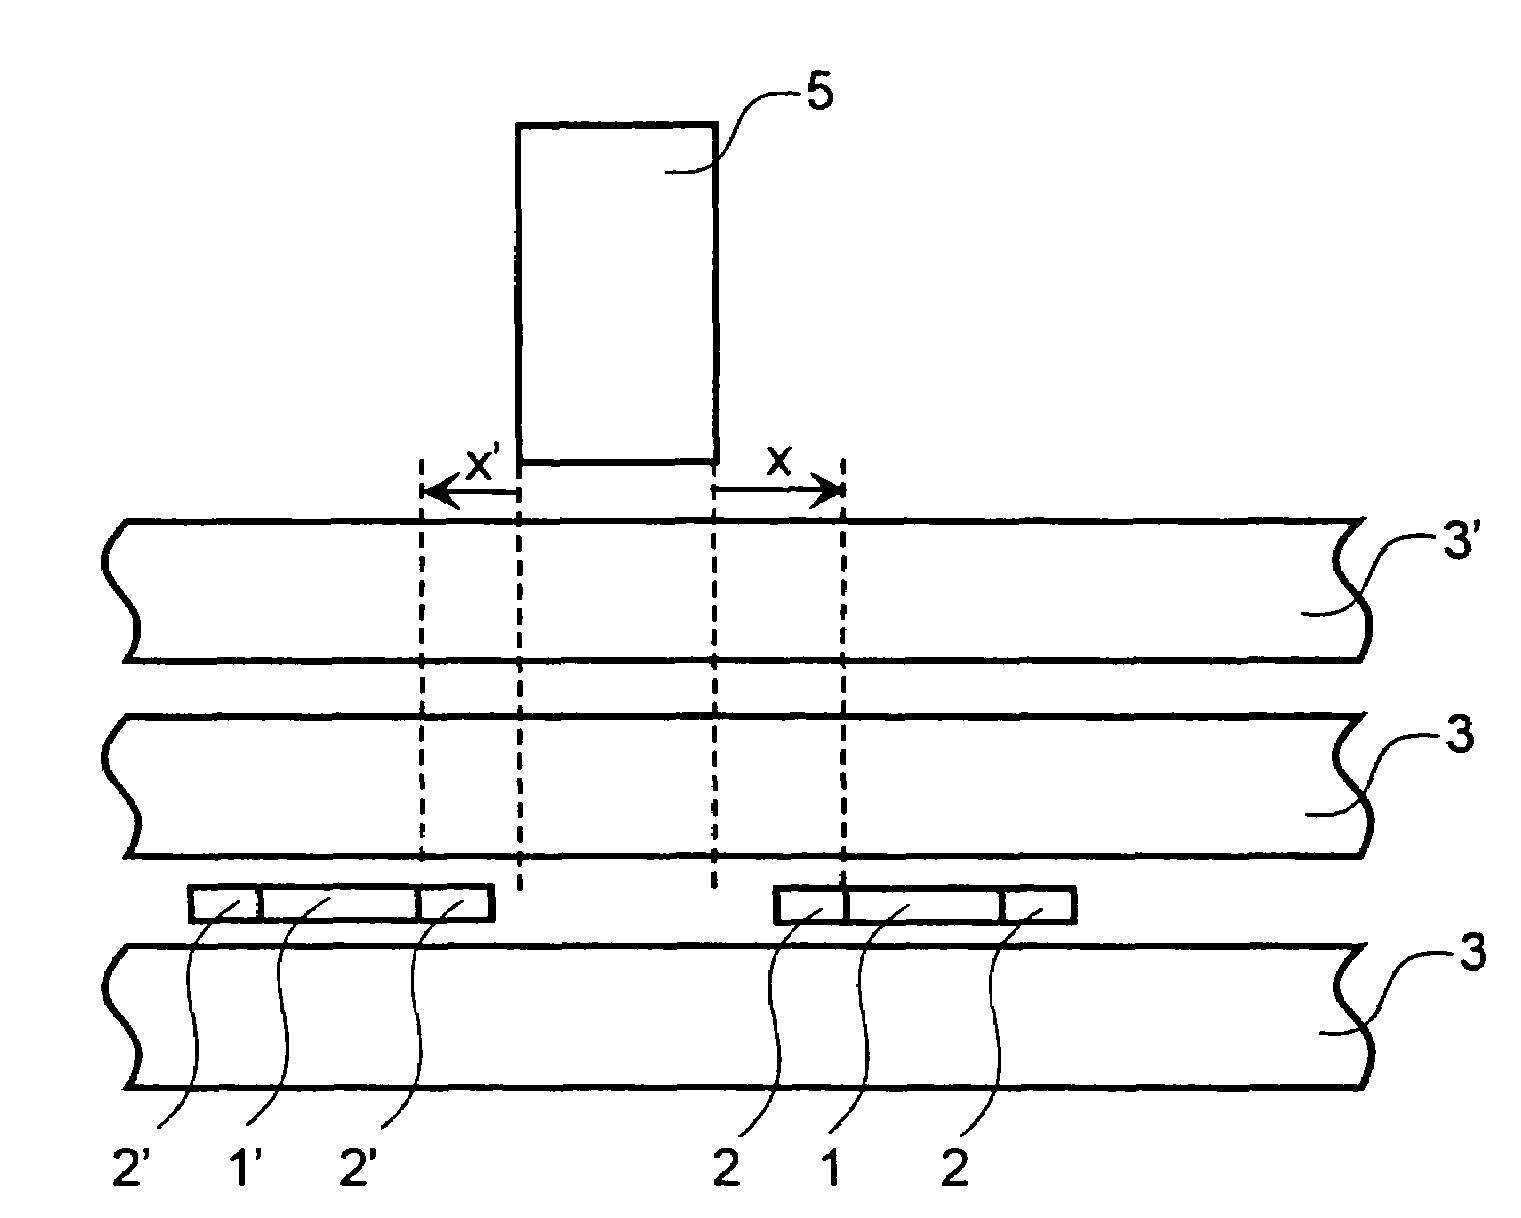 Composite magnetic head arranged so the reproducing elements do not overlap a pole of a recording element